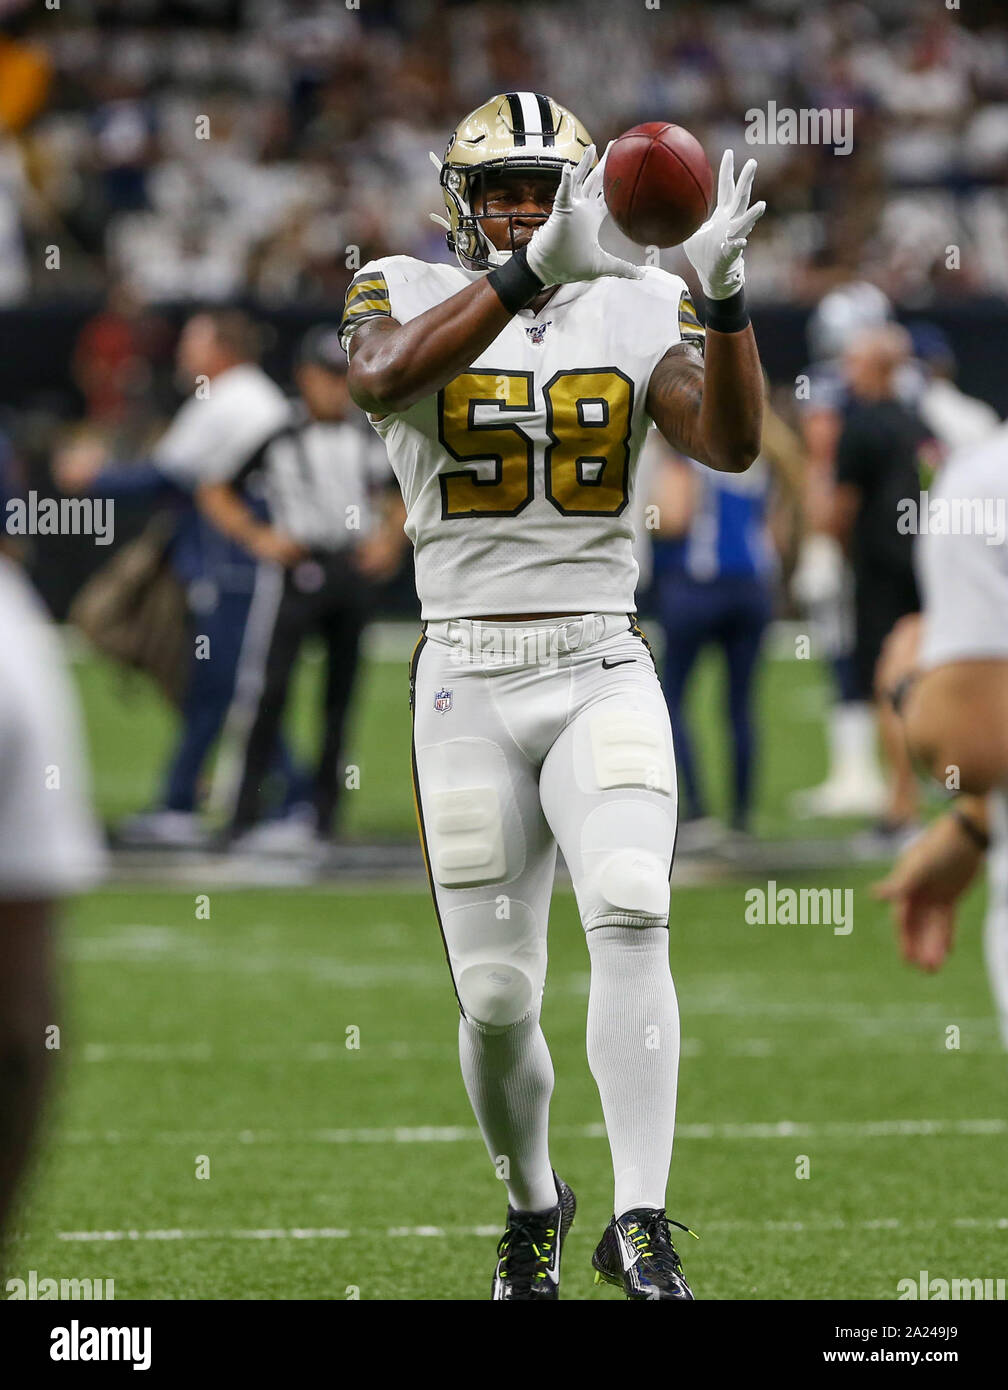 New Orleans, LA, USA. 29th Sep, 2019. New Orleans Saints linebacker Justin Anderson (58) catches a pass in pre game warm ups before their game against the Dallas Cowboys at the Mercedes Benz Superdome in New Orleans, LA. Jonathan Mailhes/CSM/Alamy Live News Stock Photo